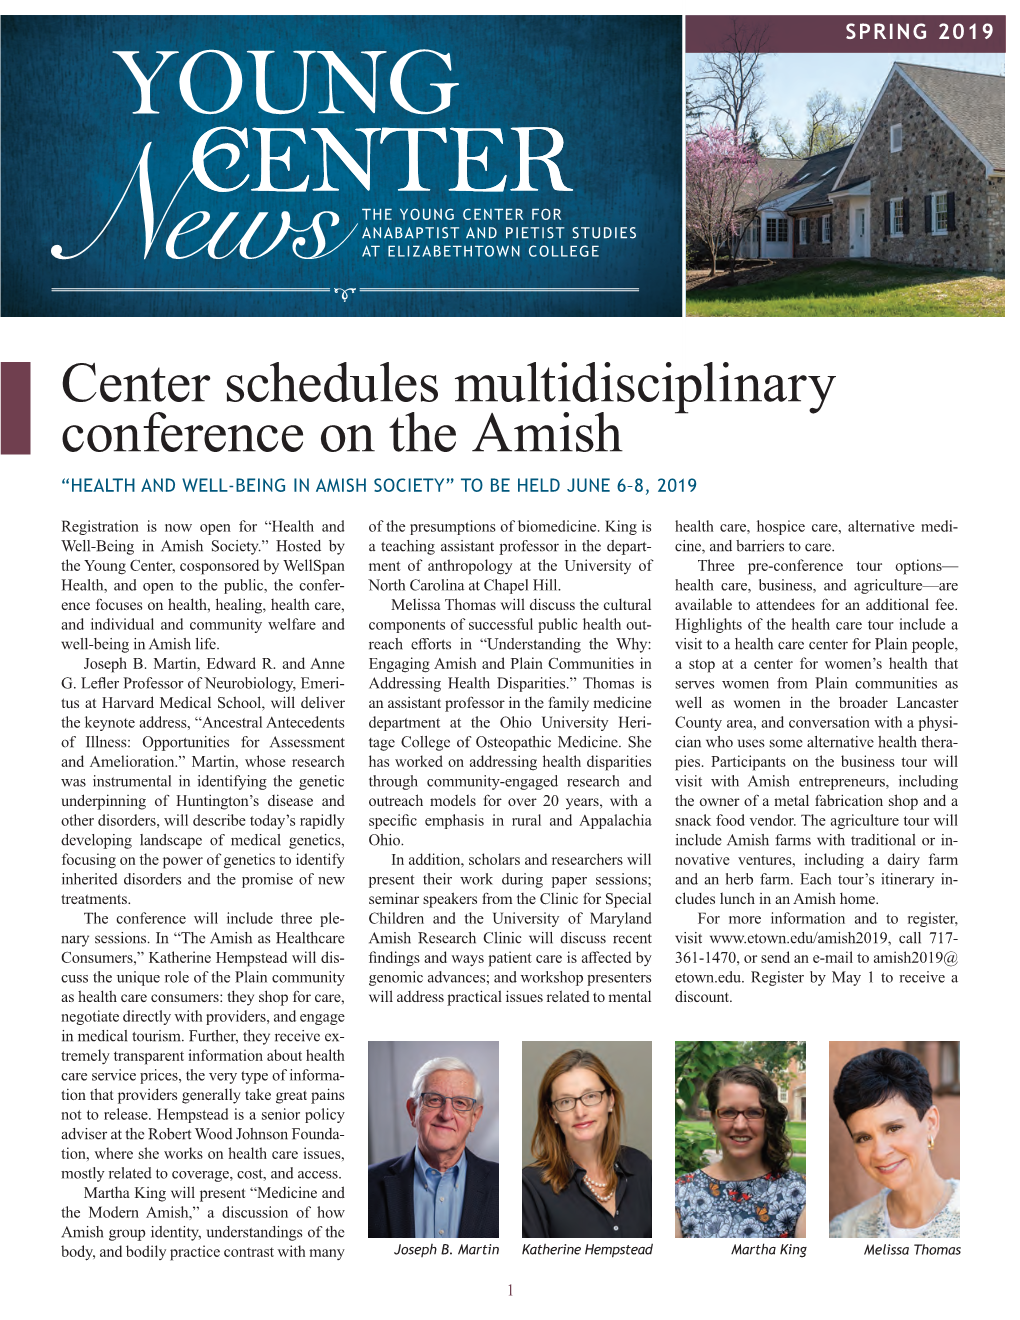 Center Schedules Multidisciplinary Conference on the Amish “HEALTH and WELL-BEING in AMISH SOCIETY” to BE HELD JUNE 6–8, 2019